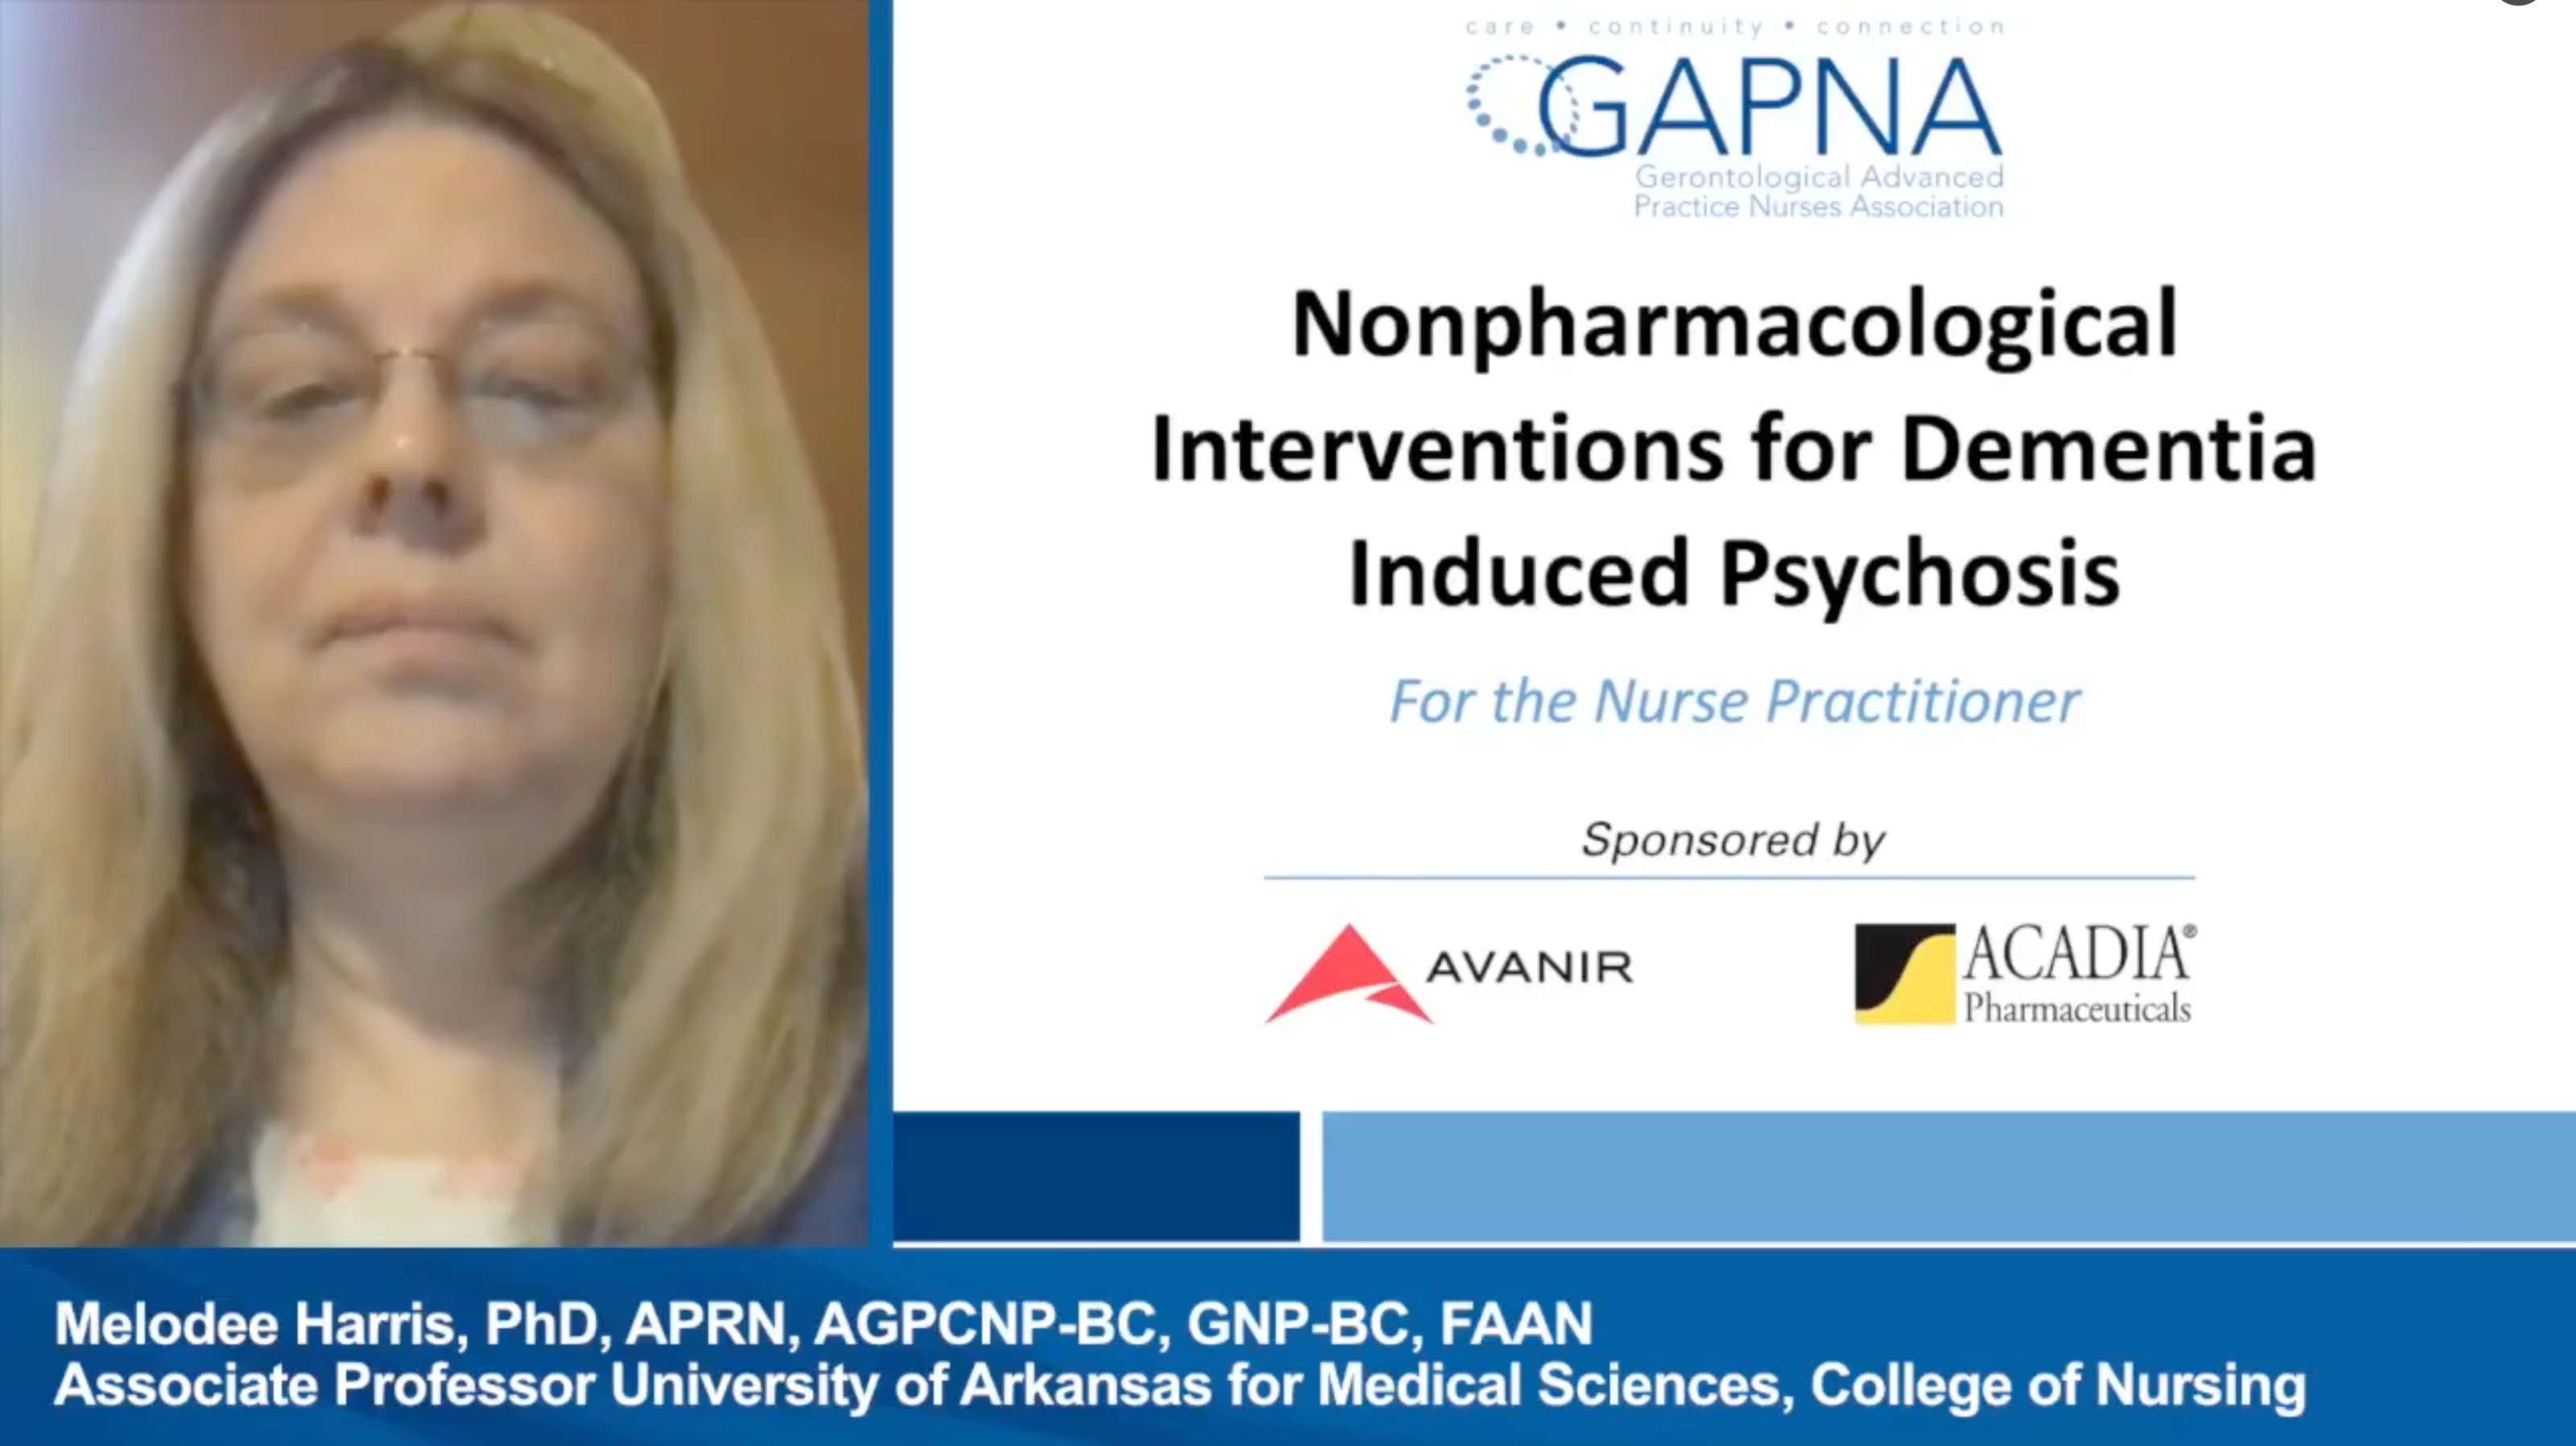 Nonpharmacological Interventions - for the Nurse Practitioner